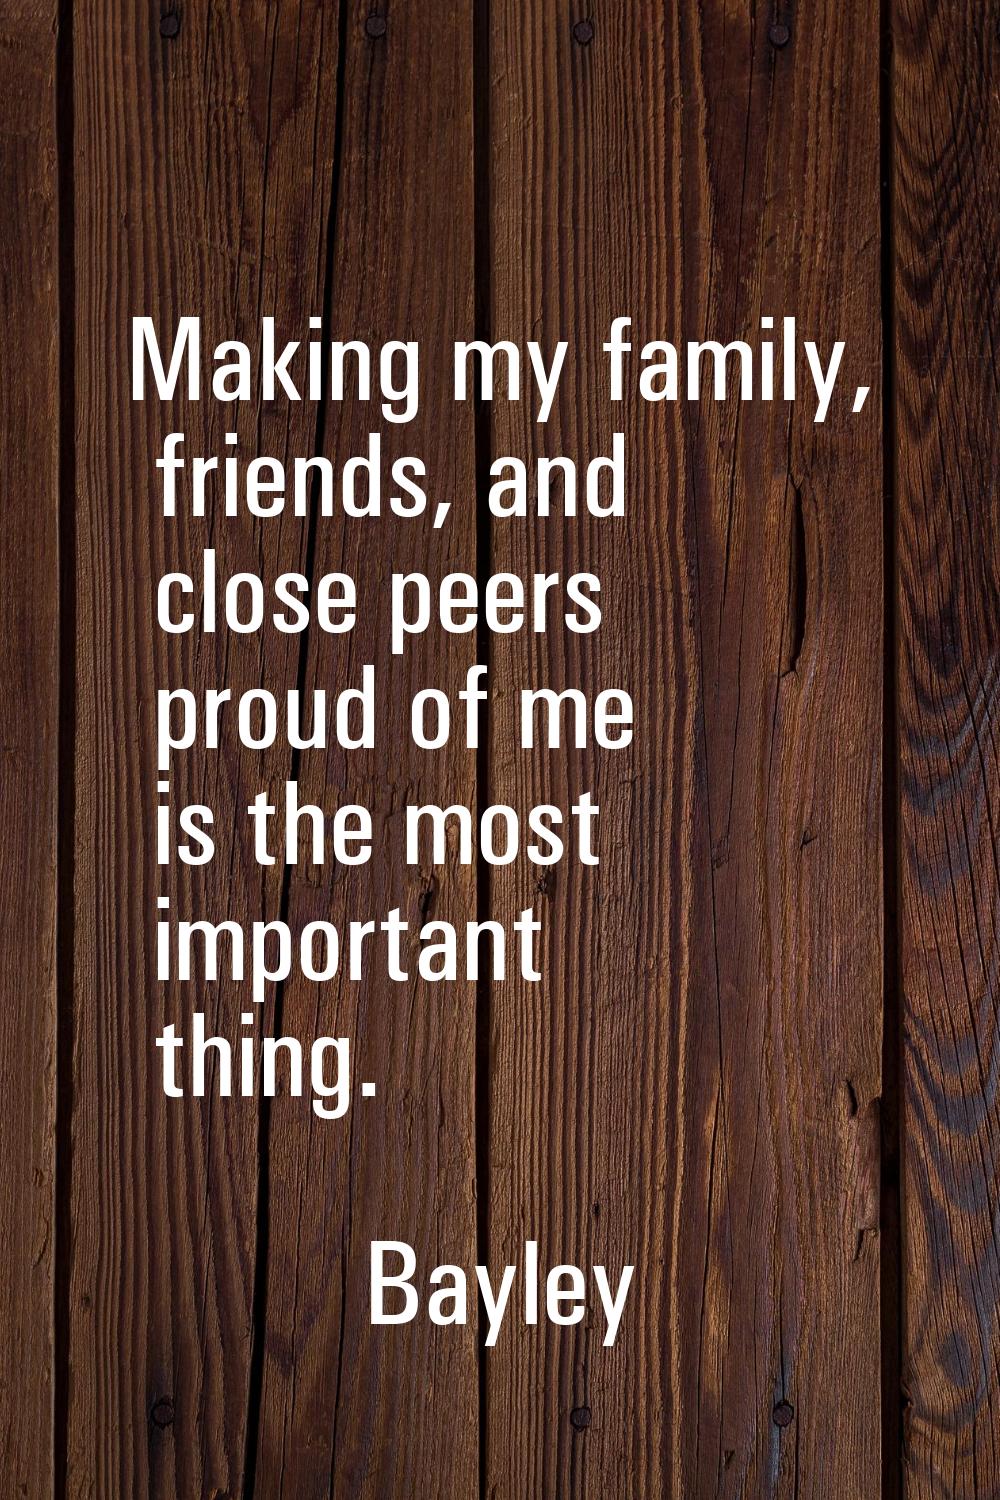 Making my family, friends, and close peers proud of me is the most important thing.